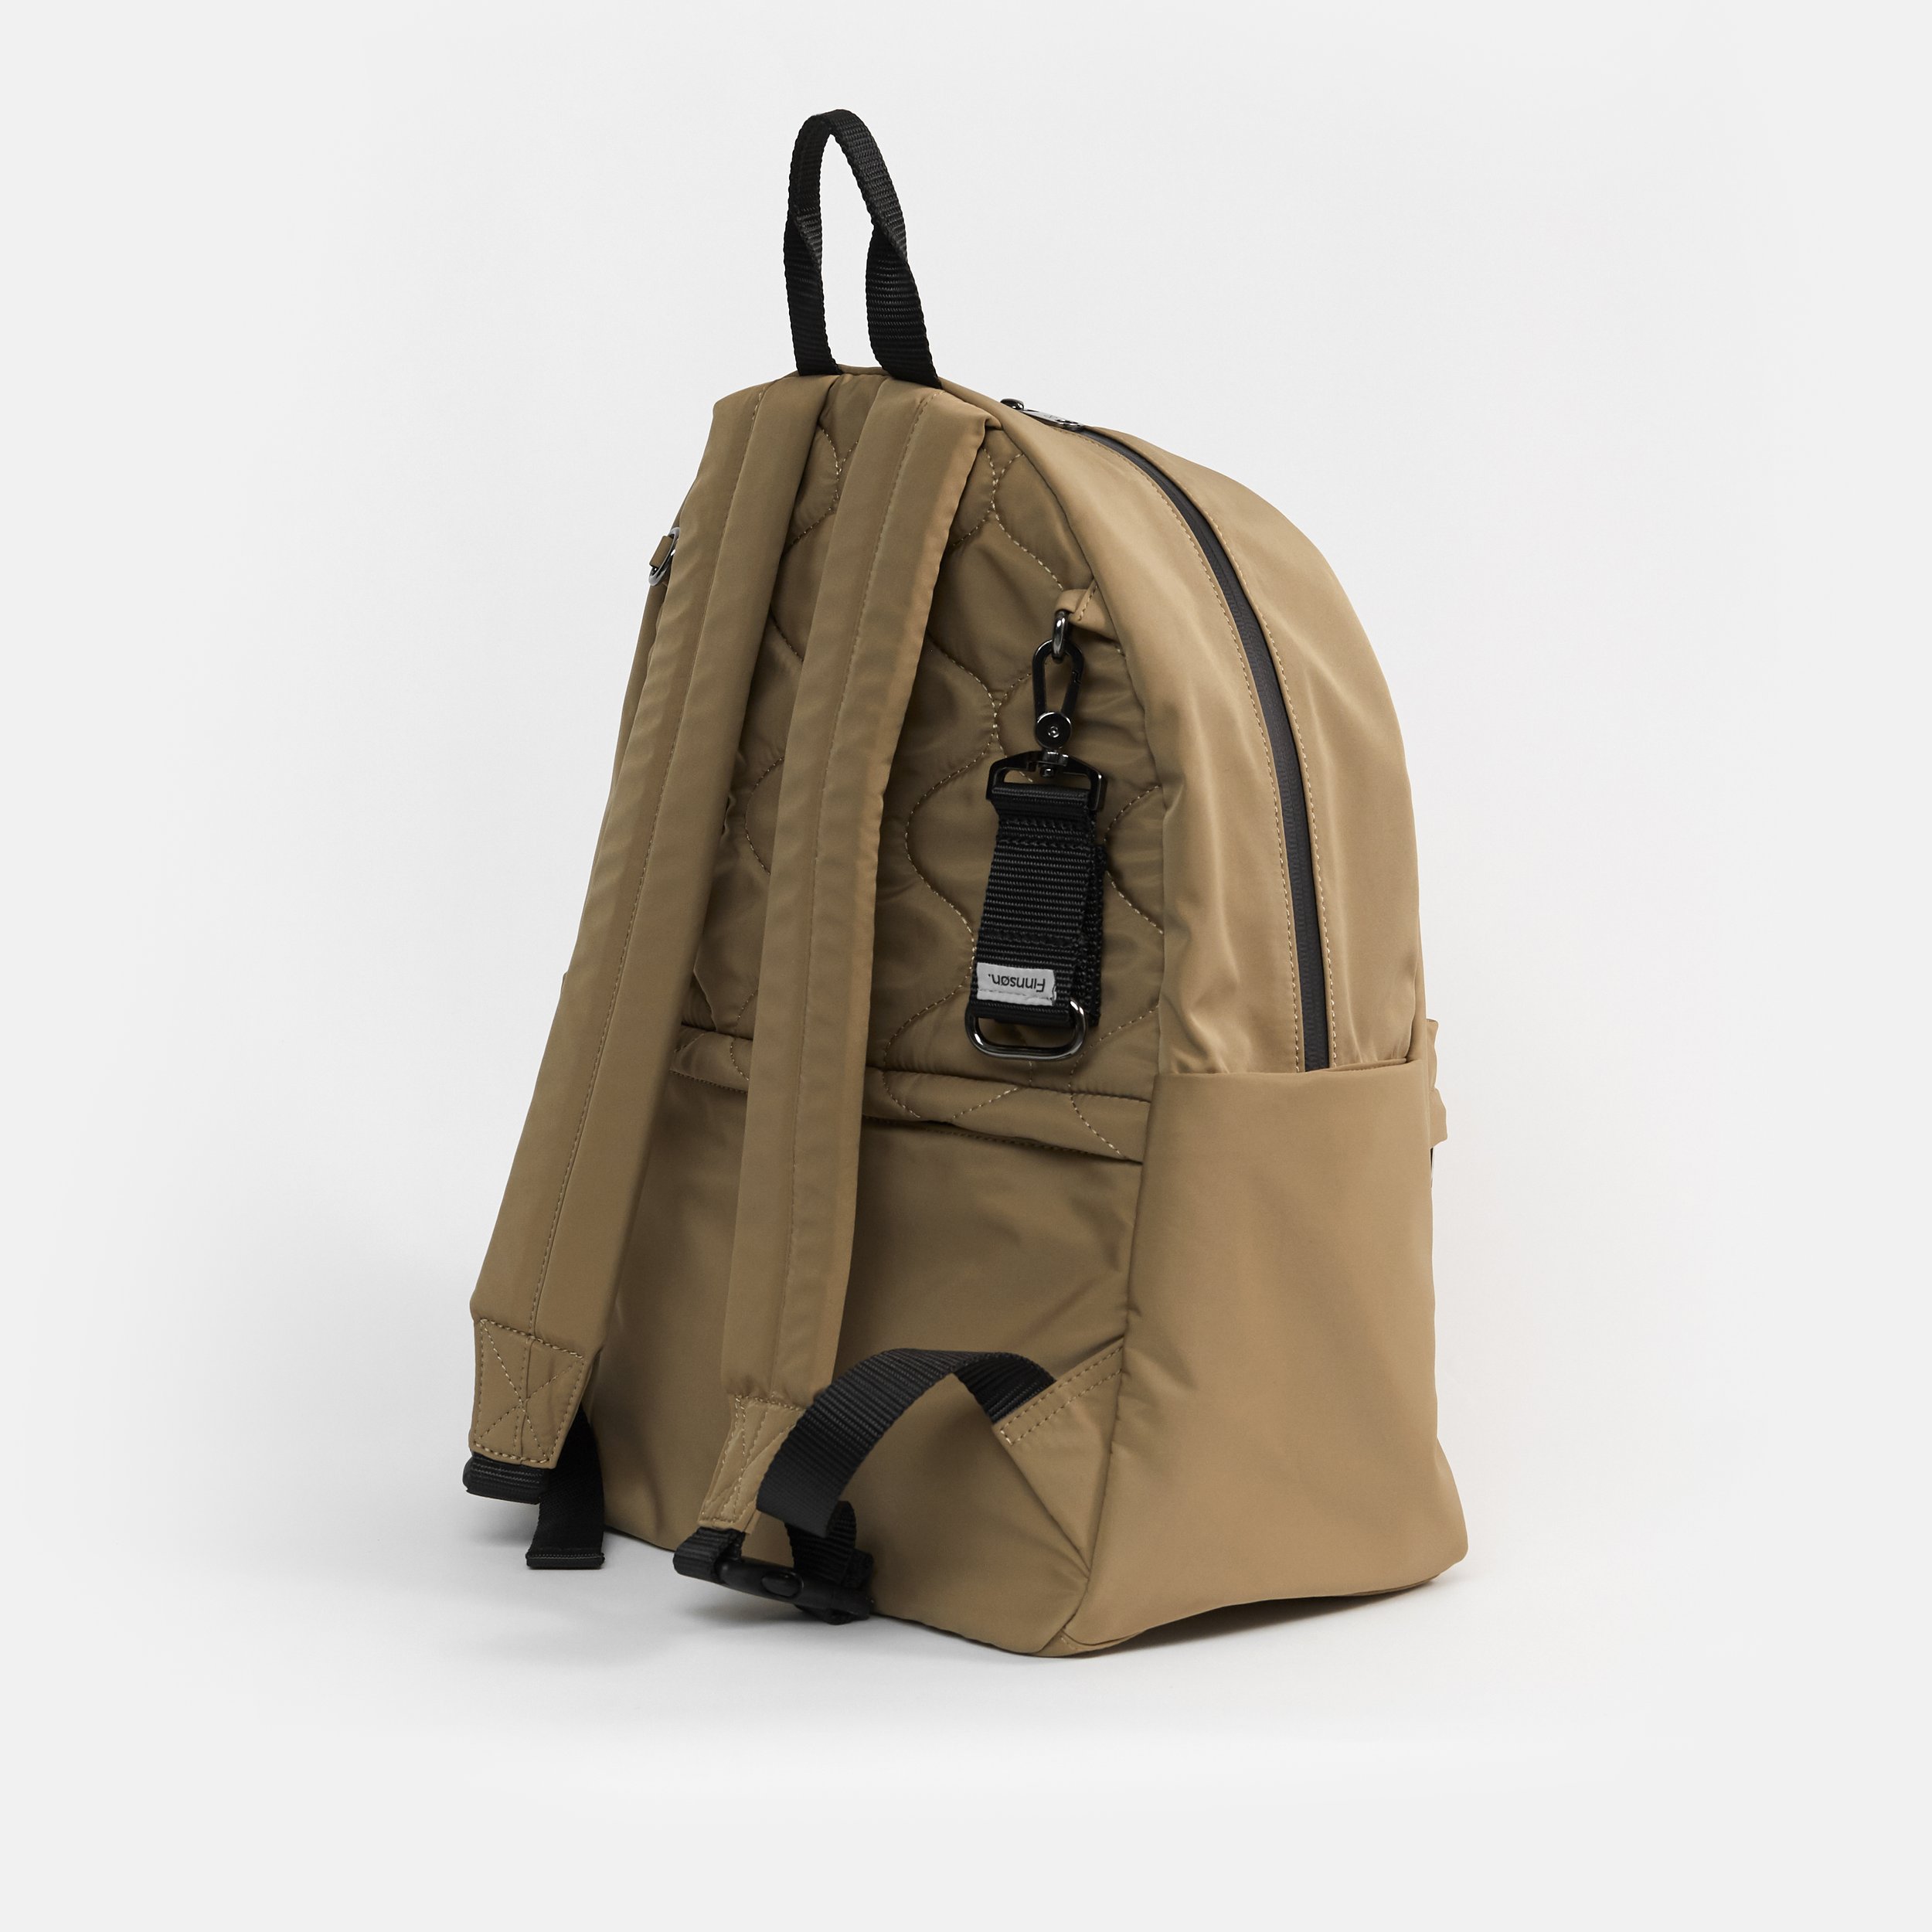 FINNSON ANA Eco Changing Backpack-CAMEL 6.jpg